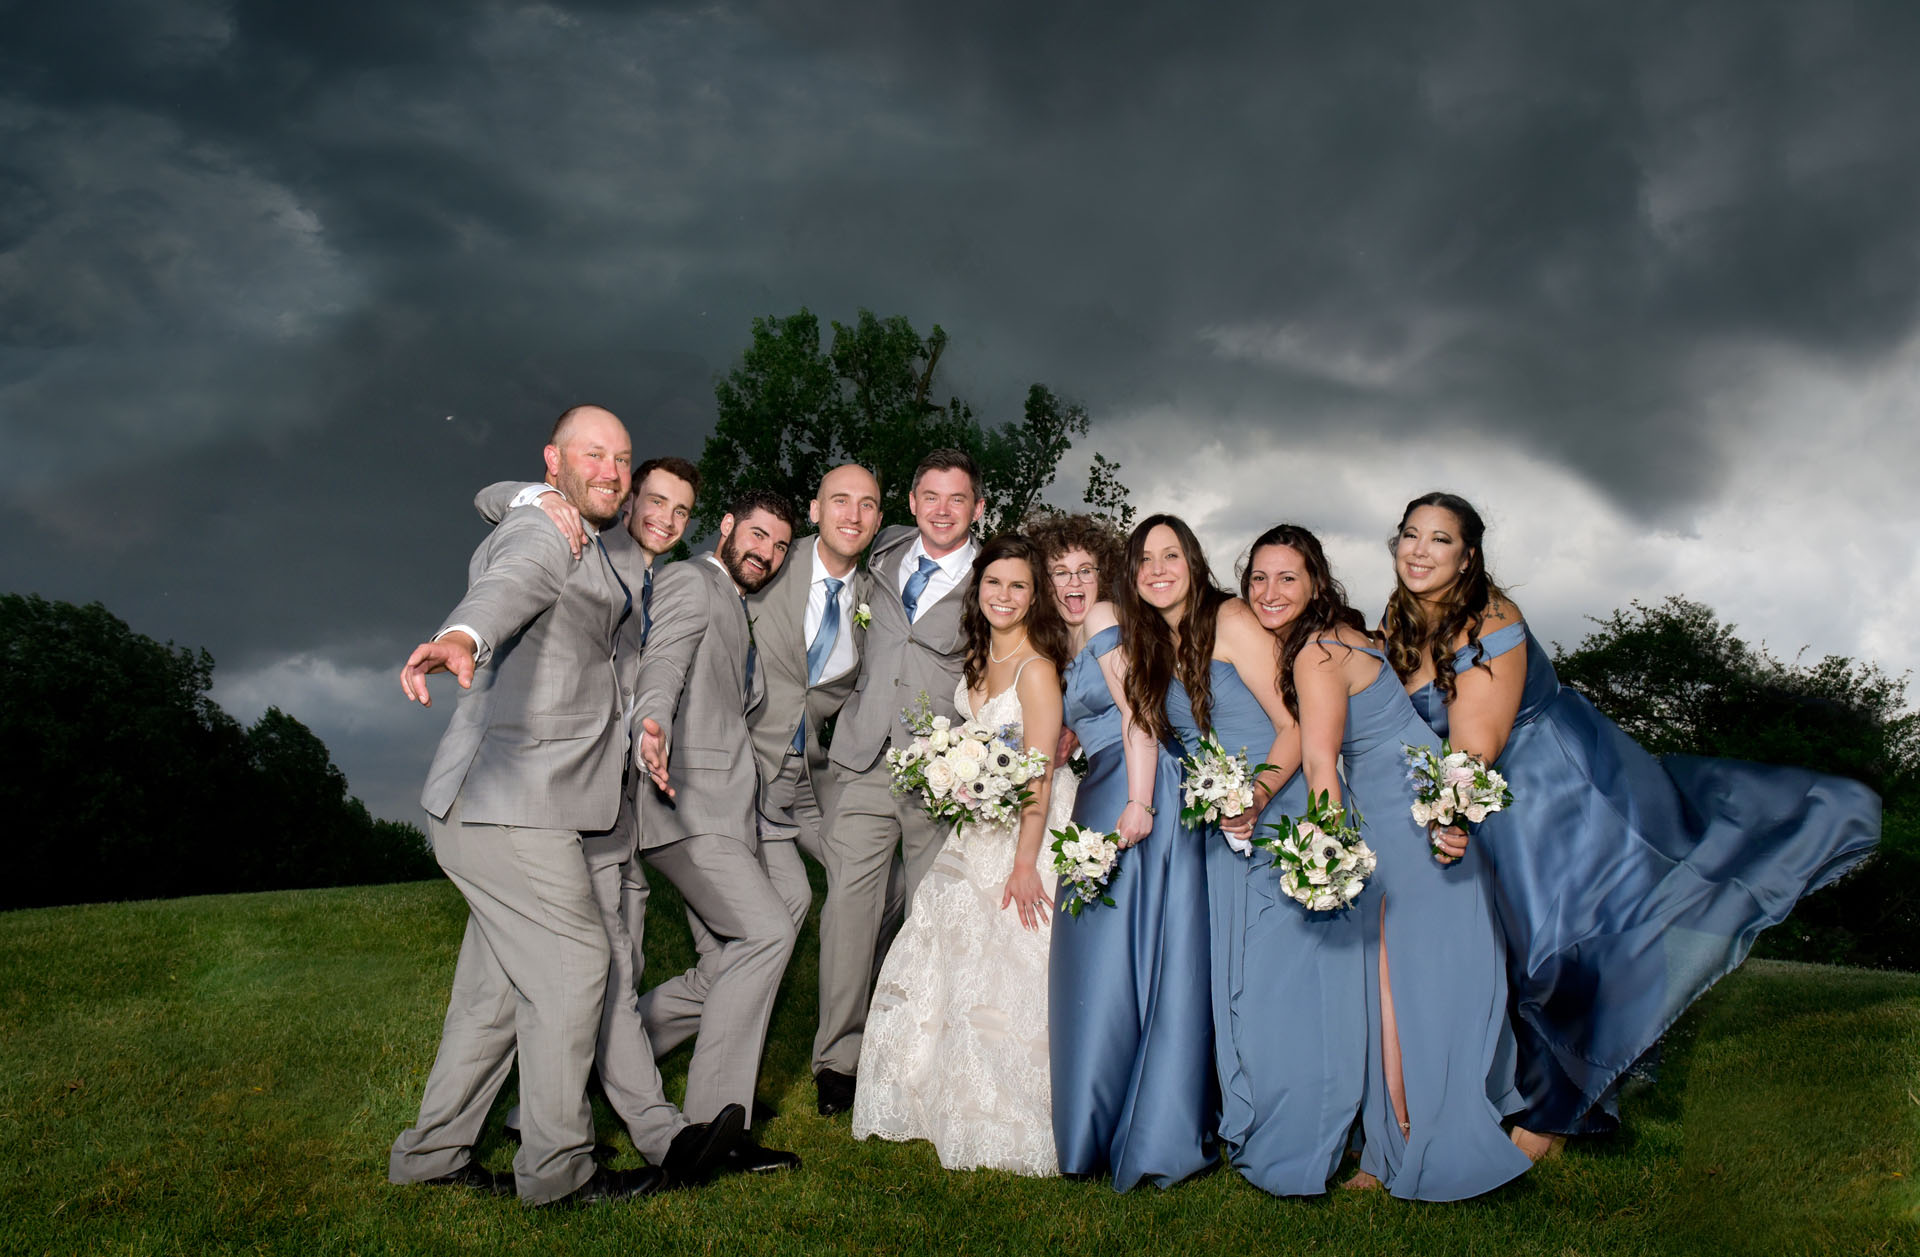 A wedding party climbs on top of hill at Ann Arbor's Stonebridge Golf Course just before a massive storm hits for this super full wedding party photo.